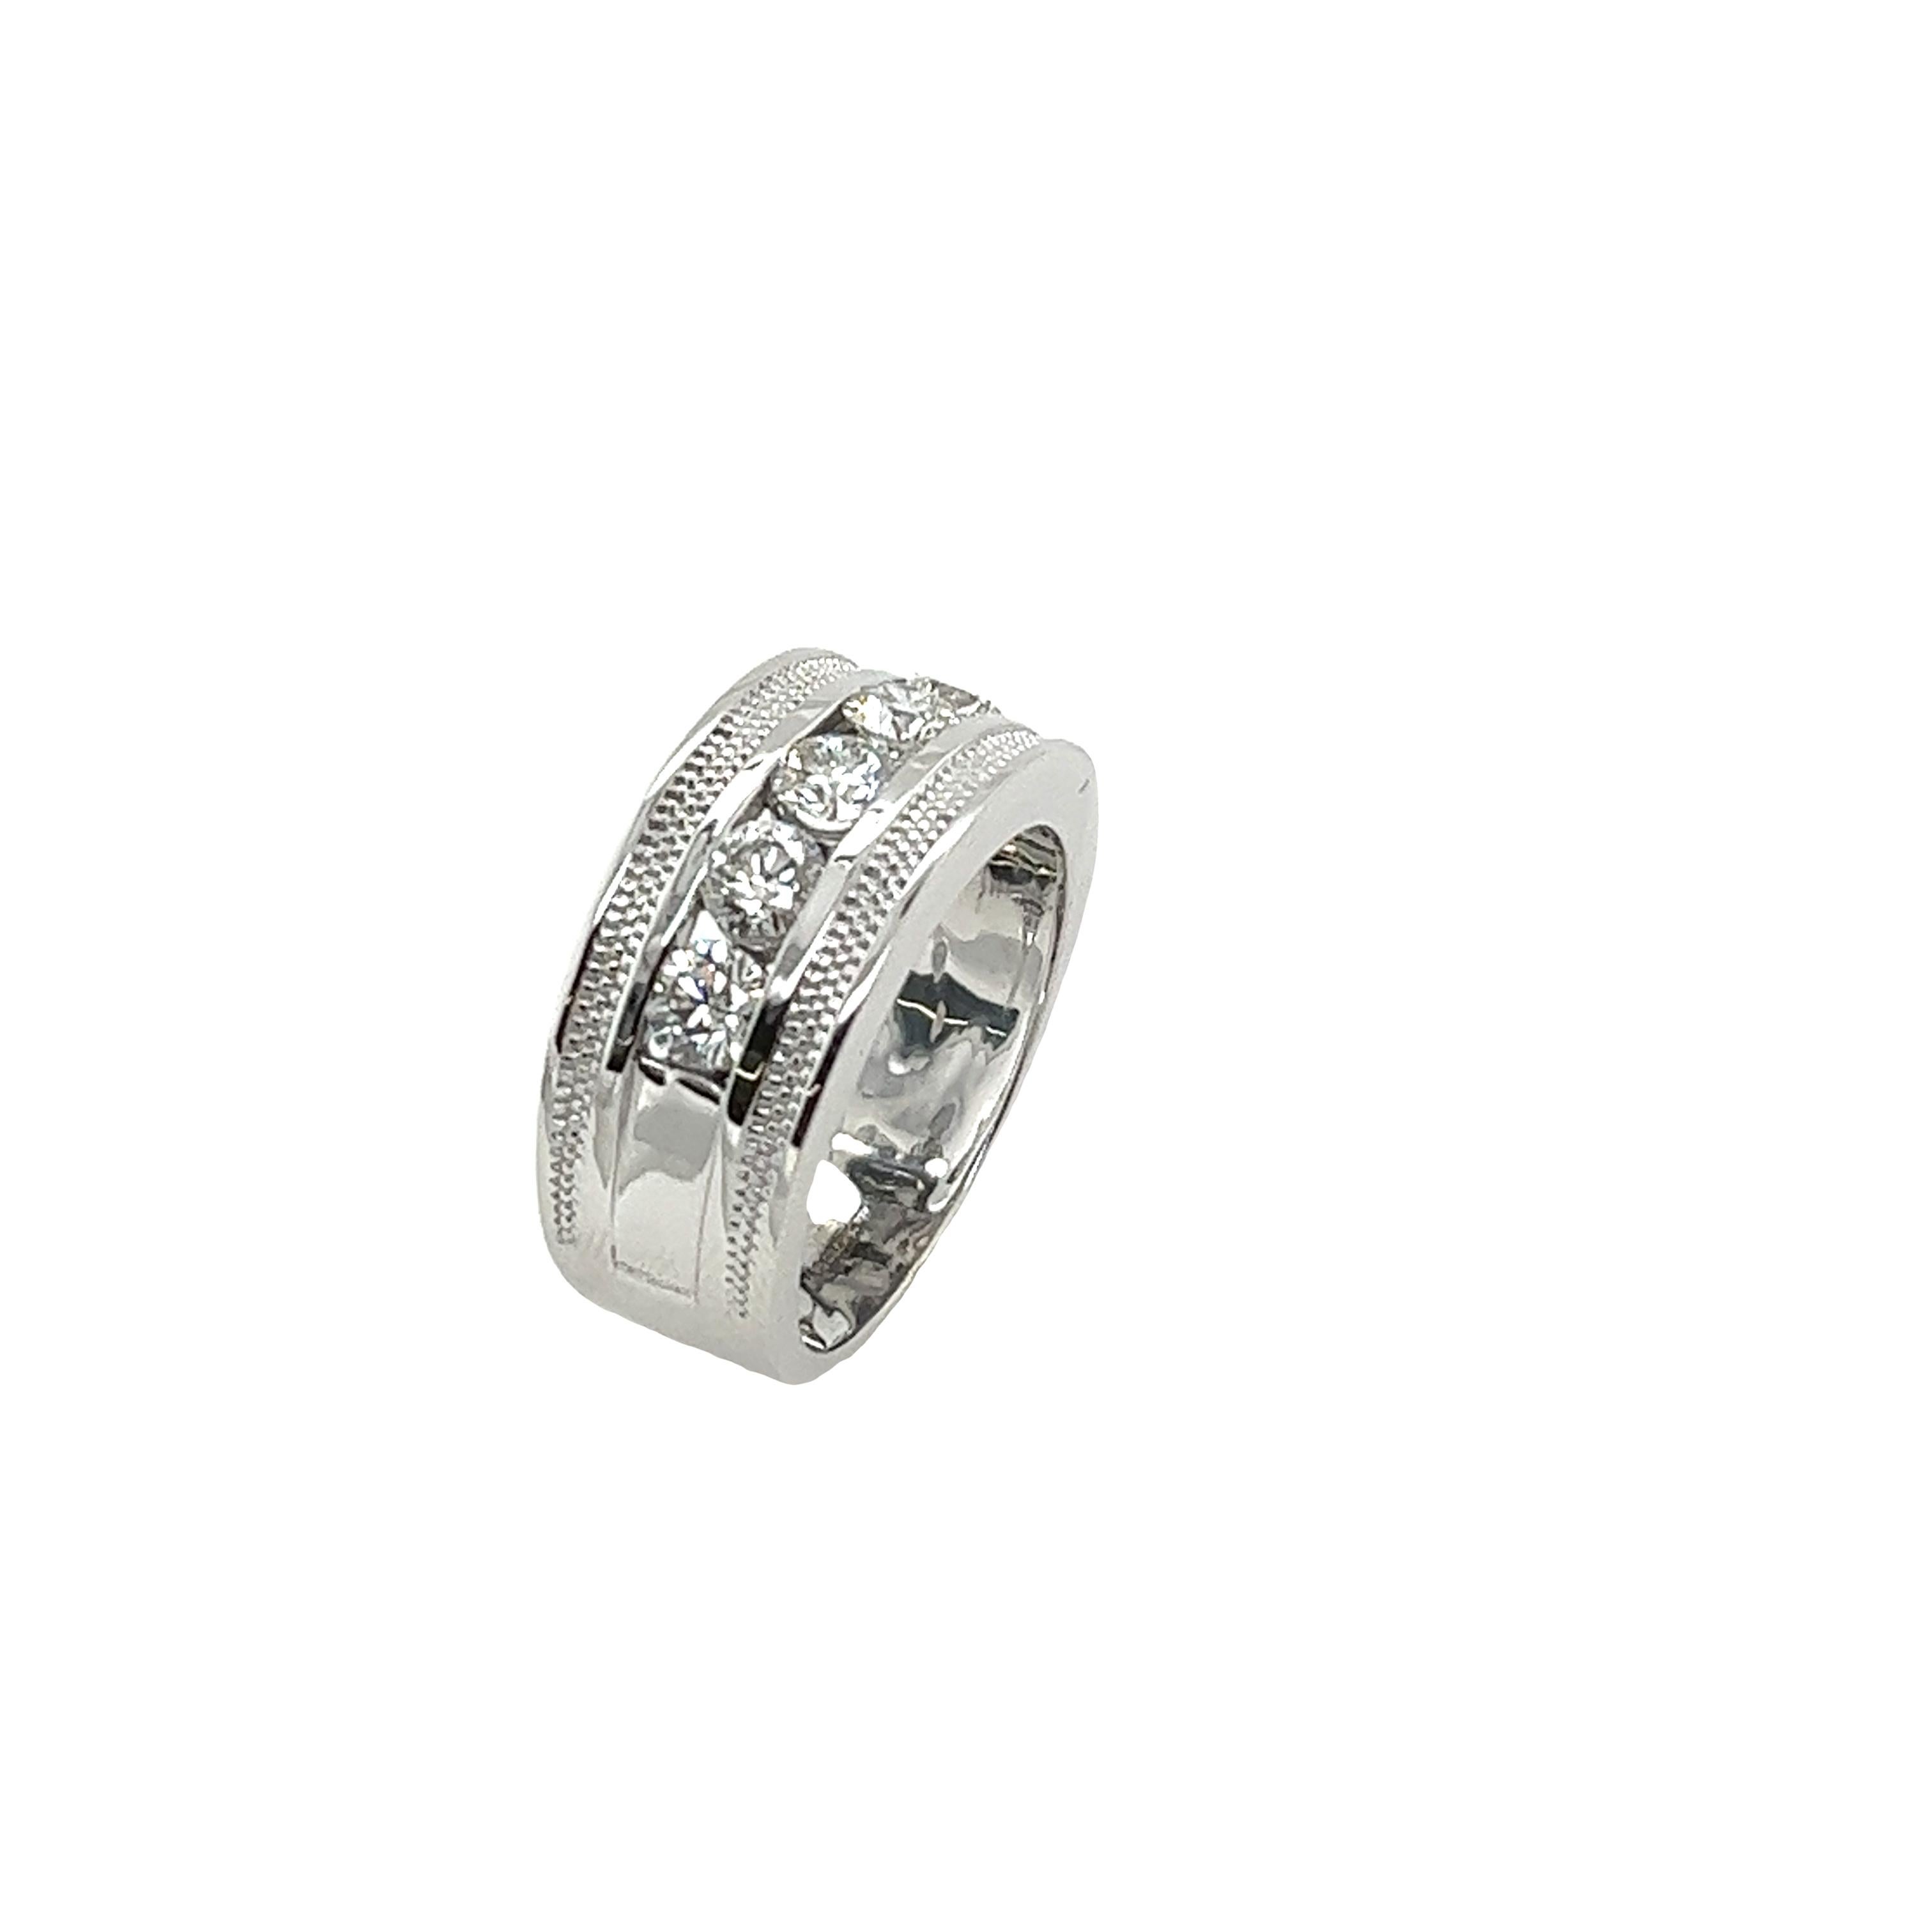 18ct White Gold 5 Stone Gia Diamond Ring, Set With 1.50ct G Colour IF clarity For Sale 5